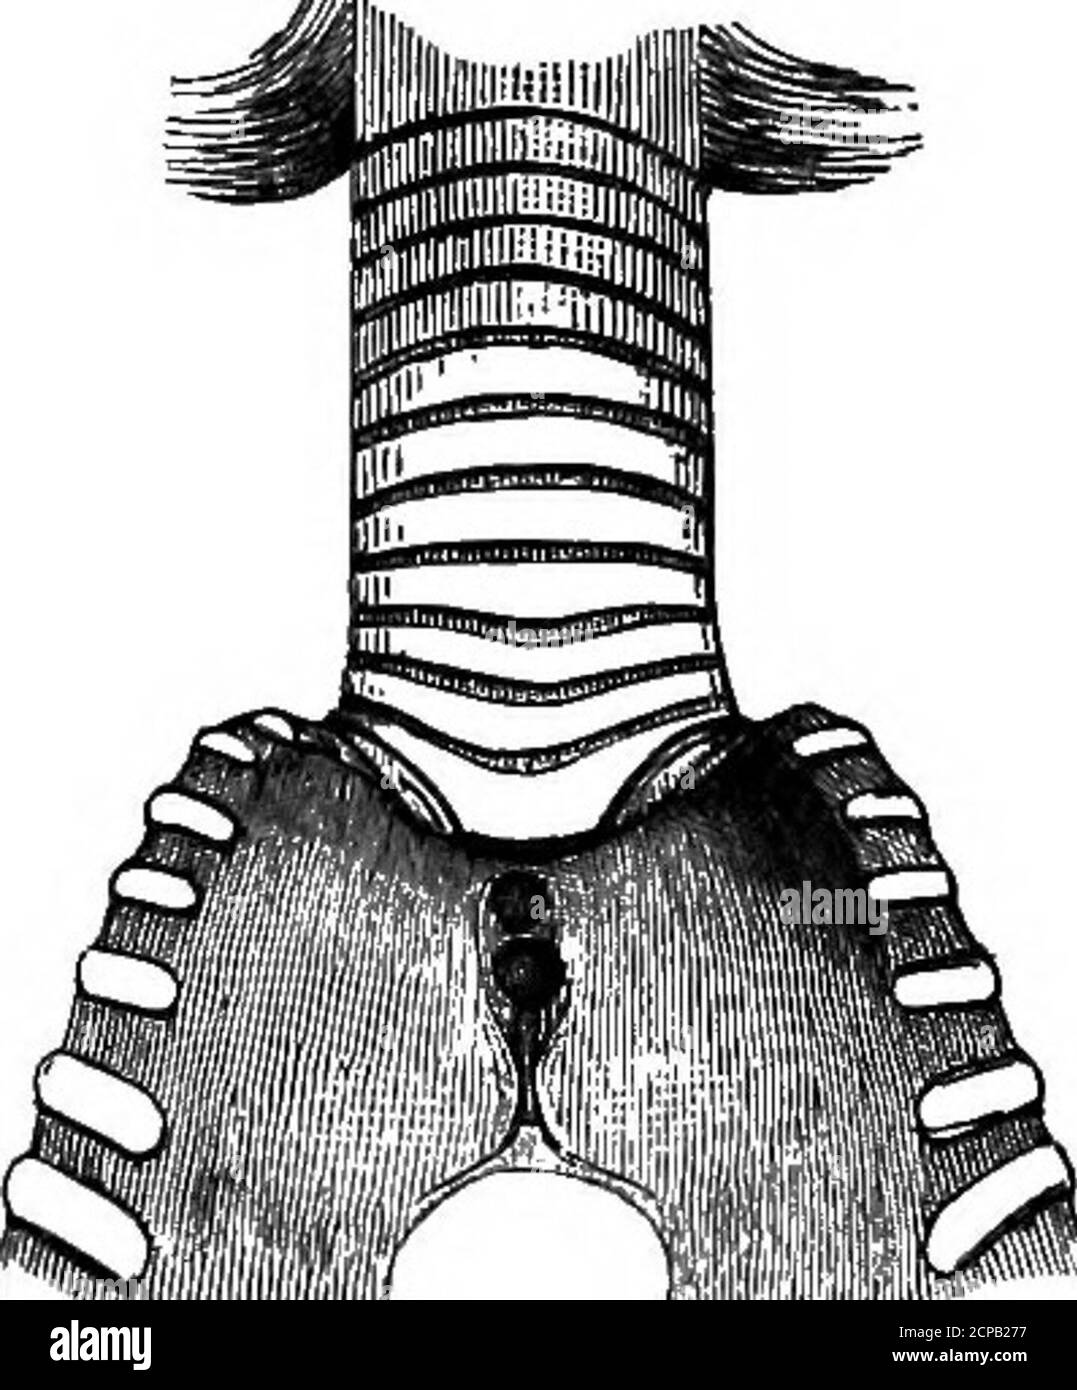 . The structure and classification of birds . s fuse4anteriorly with the walls of the.skull. The nostrils are continuedforward by a groove precisely likethat of Scopus and Gancroma. Inthe palatine bones the fusion of theinternal laminae to form a mediankeel behind the interparietal spaceis precisely like Scopus; so, too, isthe lateral angle of these bones (see p. 422). There is a firmsynostosis between the furcula and the carina sterni. Cervical vertebrae 7-13 have, as in most other Herodiones(excluding, however, the supposed ally of BalcBniceps, Scopus),a ventral catapophysial canal. The fami Stock Photo